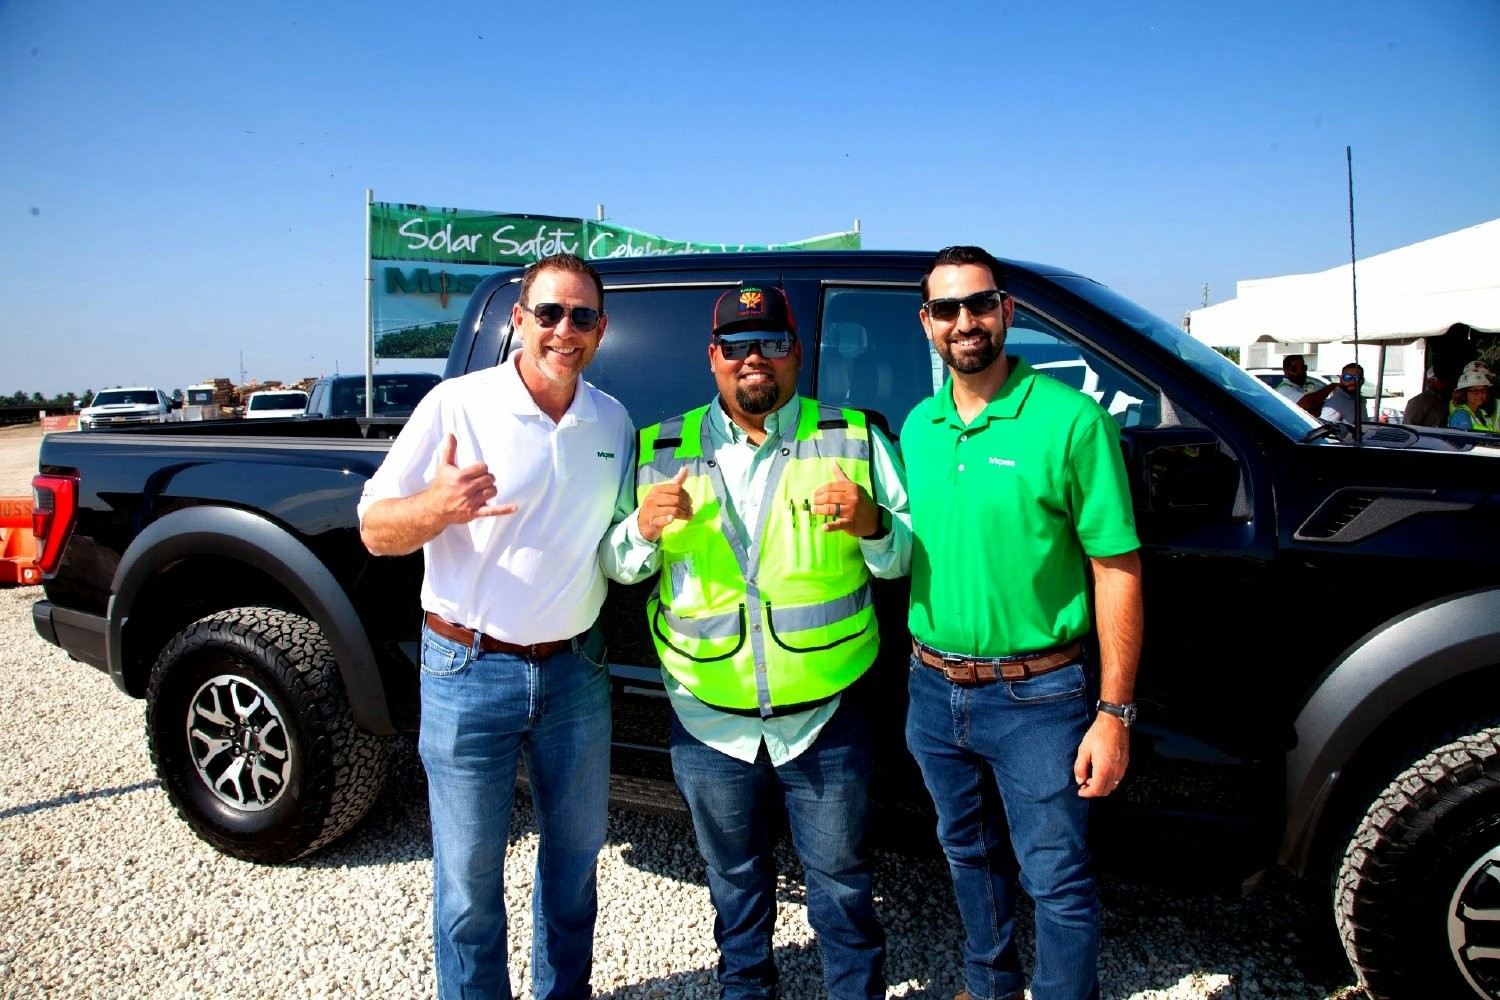 Scott Moss, CEO (left) and Edwin Perkins, President, (right) celebrating Solar Safety Week.